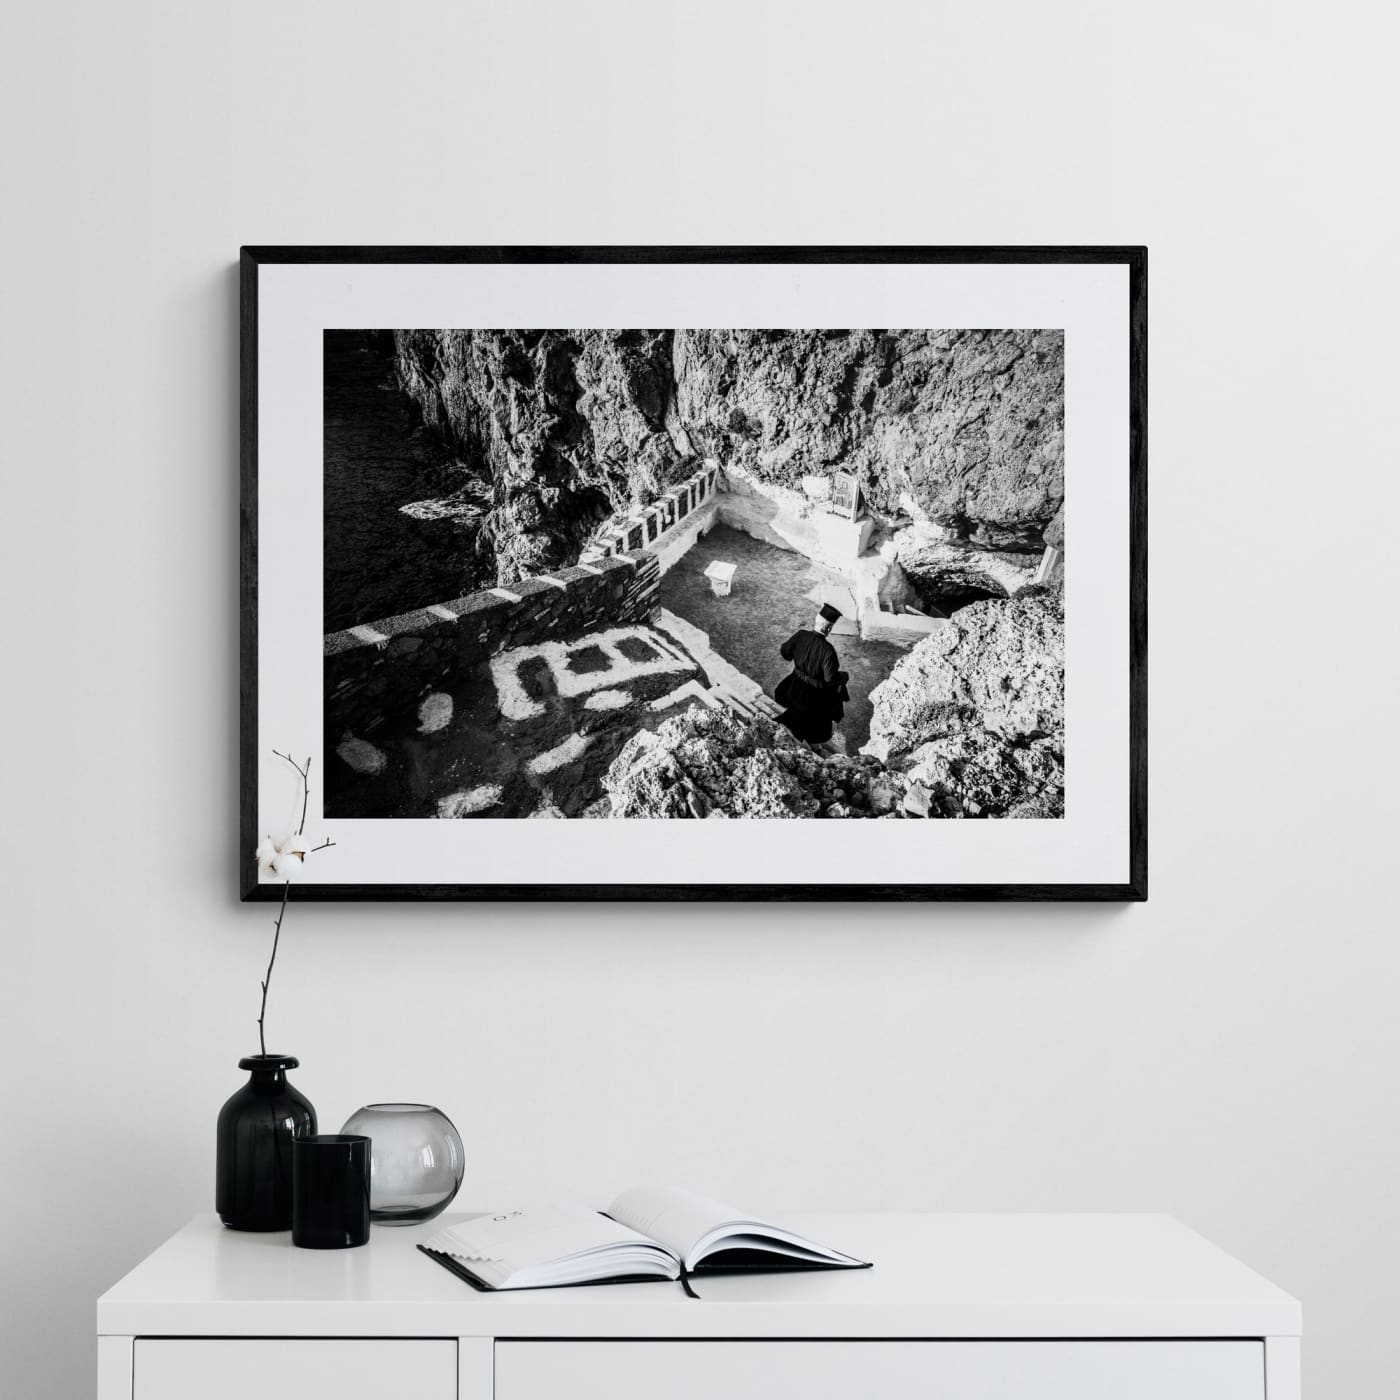 Black and White Photography Wall Art Greece | Priest descending to the St. John church in Vrykounta Olympos Karpathos Dodecanese by George Tatakis - single framed photo